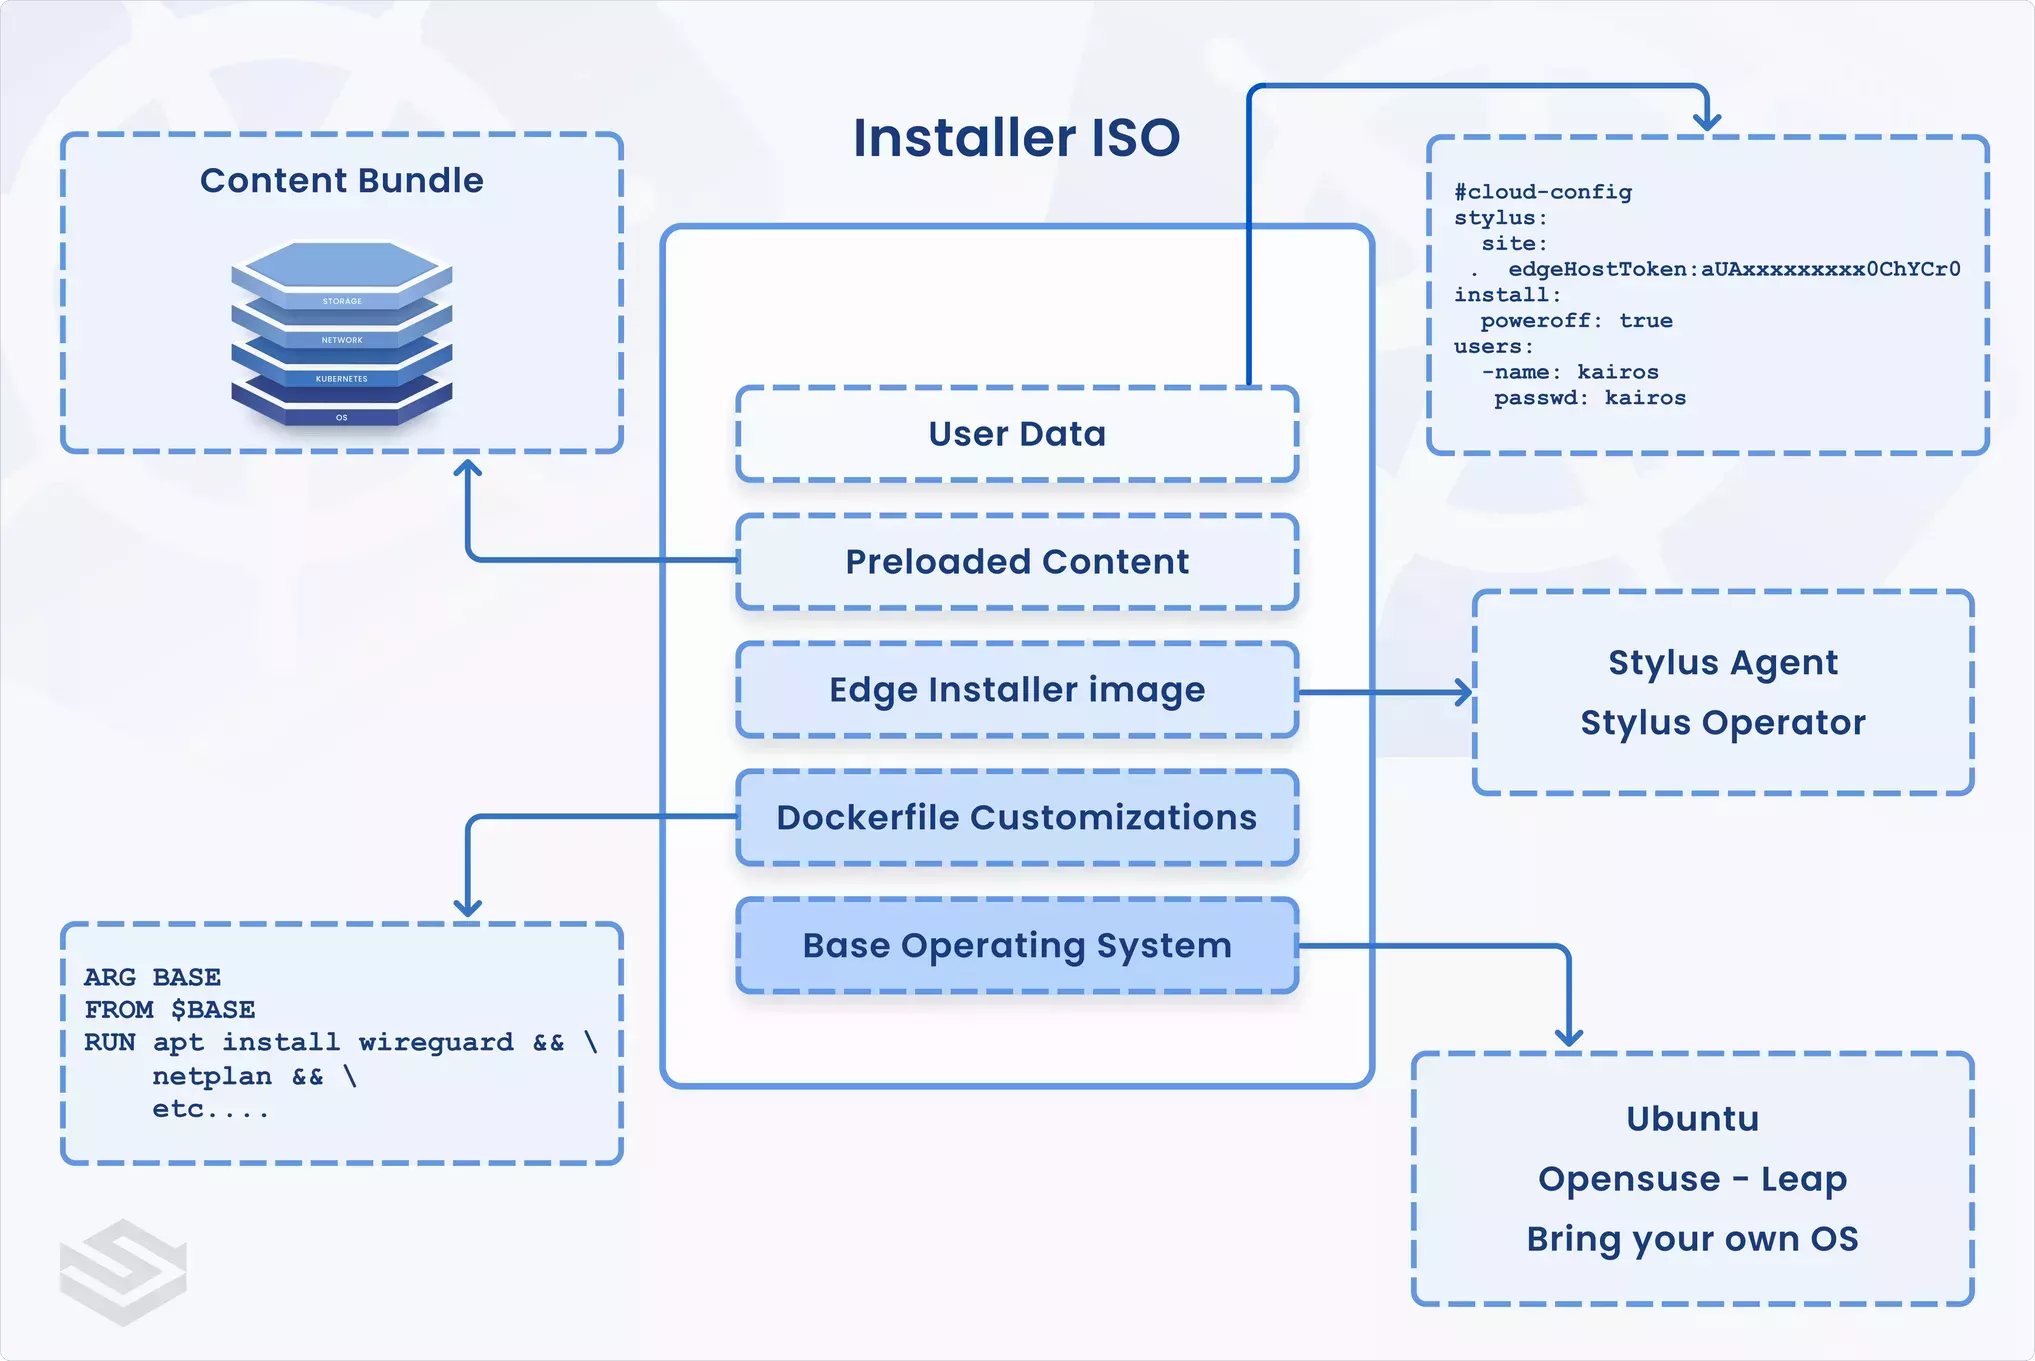 A diagram breaking up the internal components of the ISO image